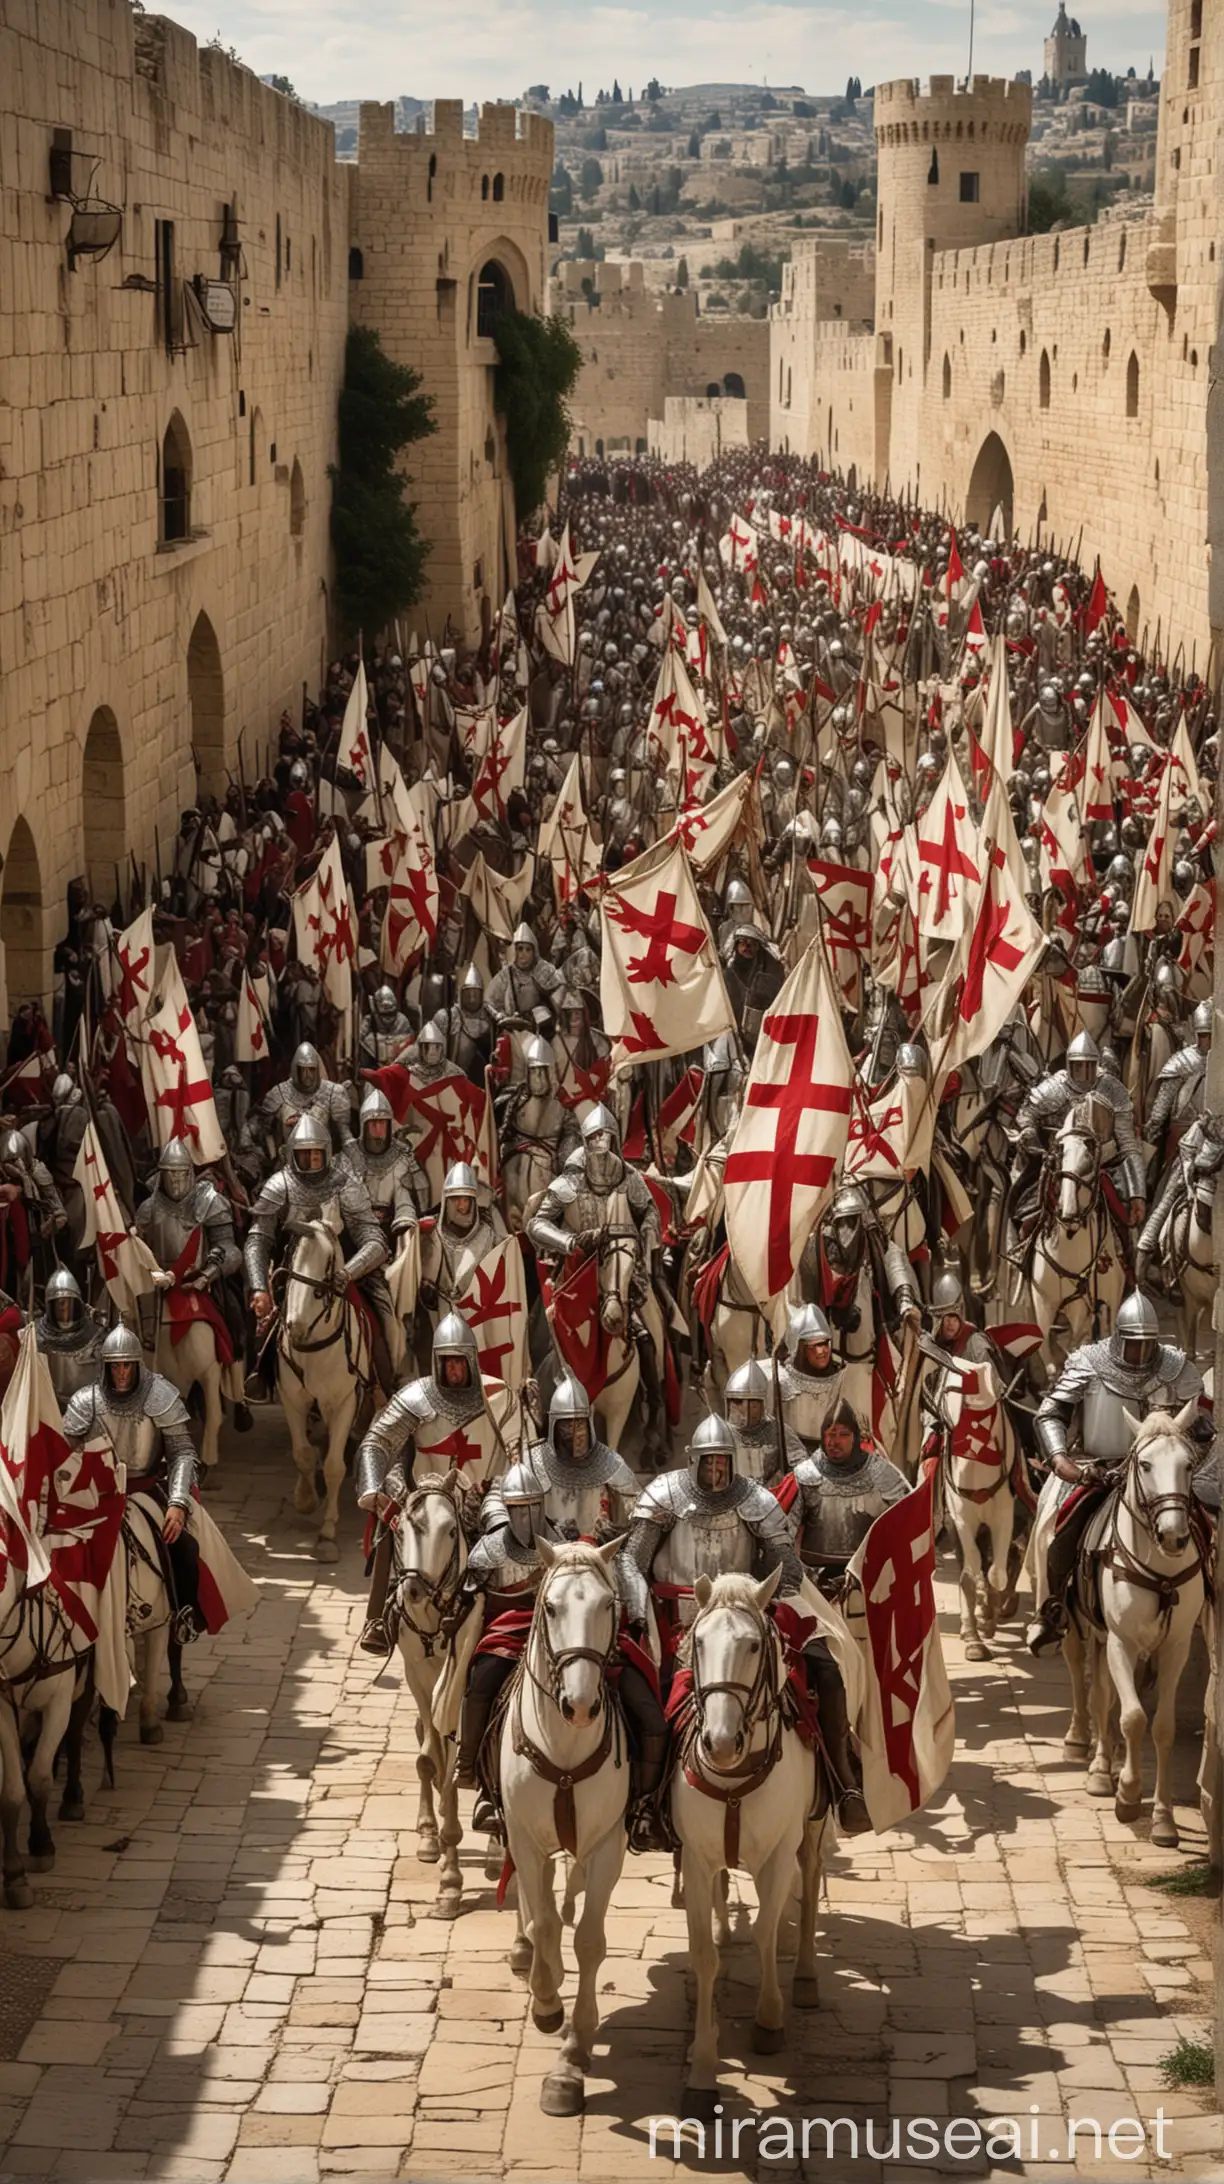 A tableau of the Crusaders marching forth to reclaim Jerusalem, with the Knights Templar leading the charge.
